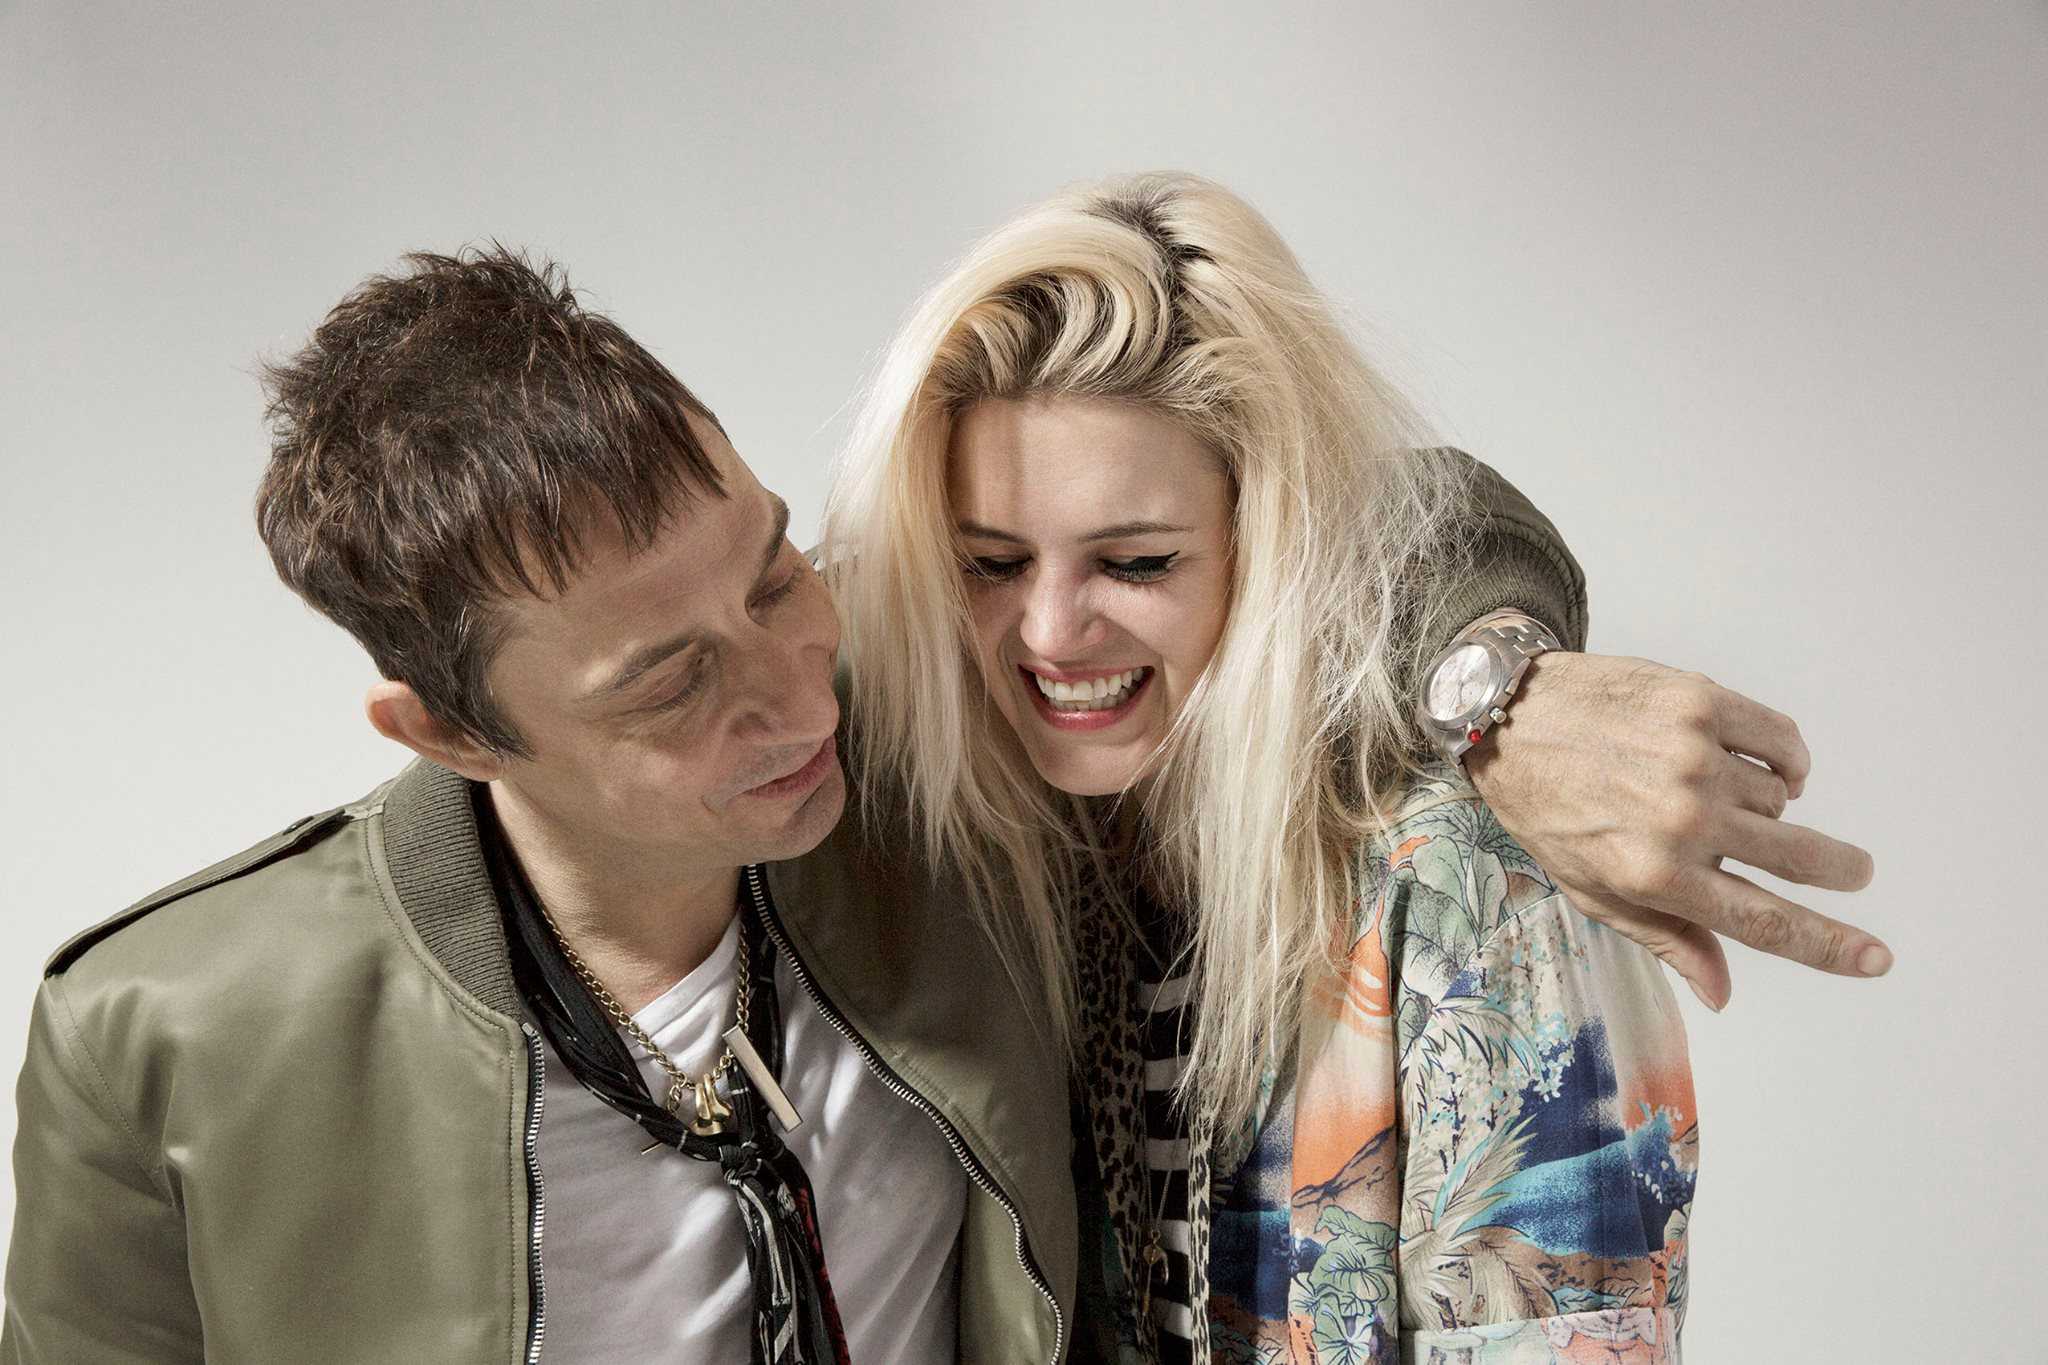 The Kills will bring their raw and edgy sound to the the desert music and art festival Official Facebook photo.